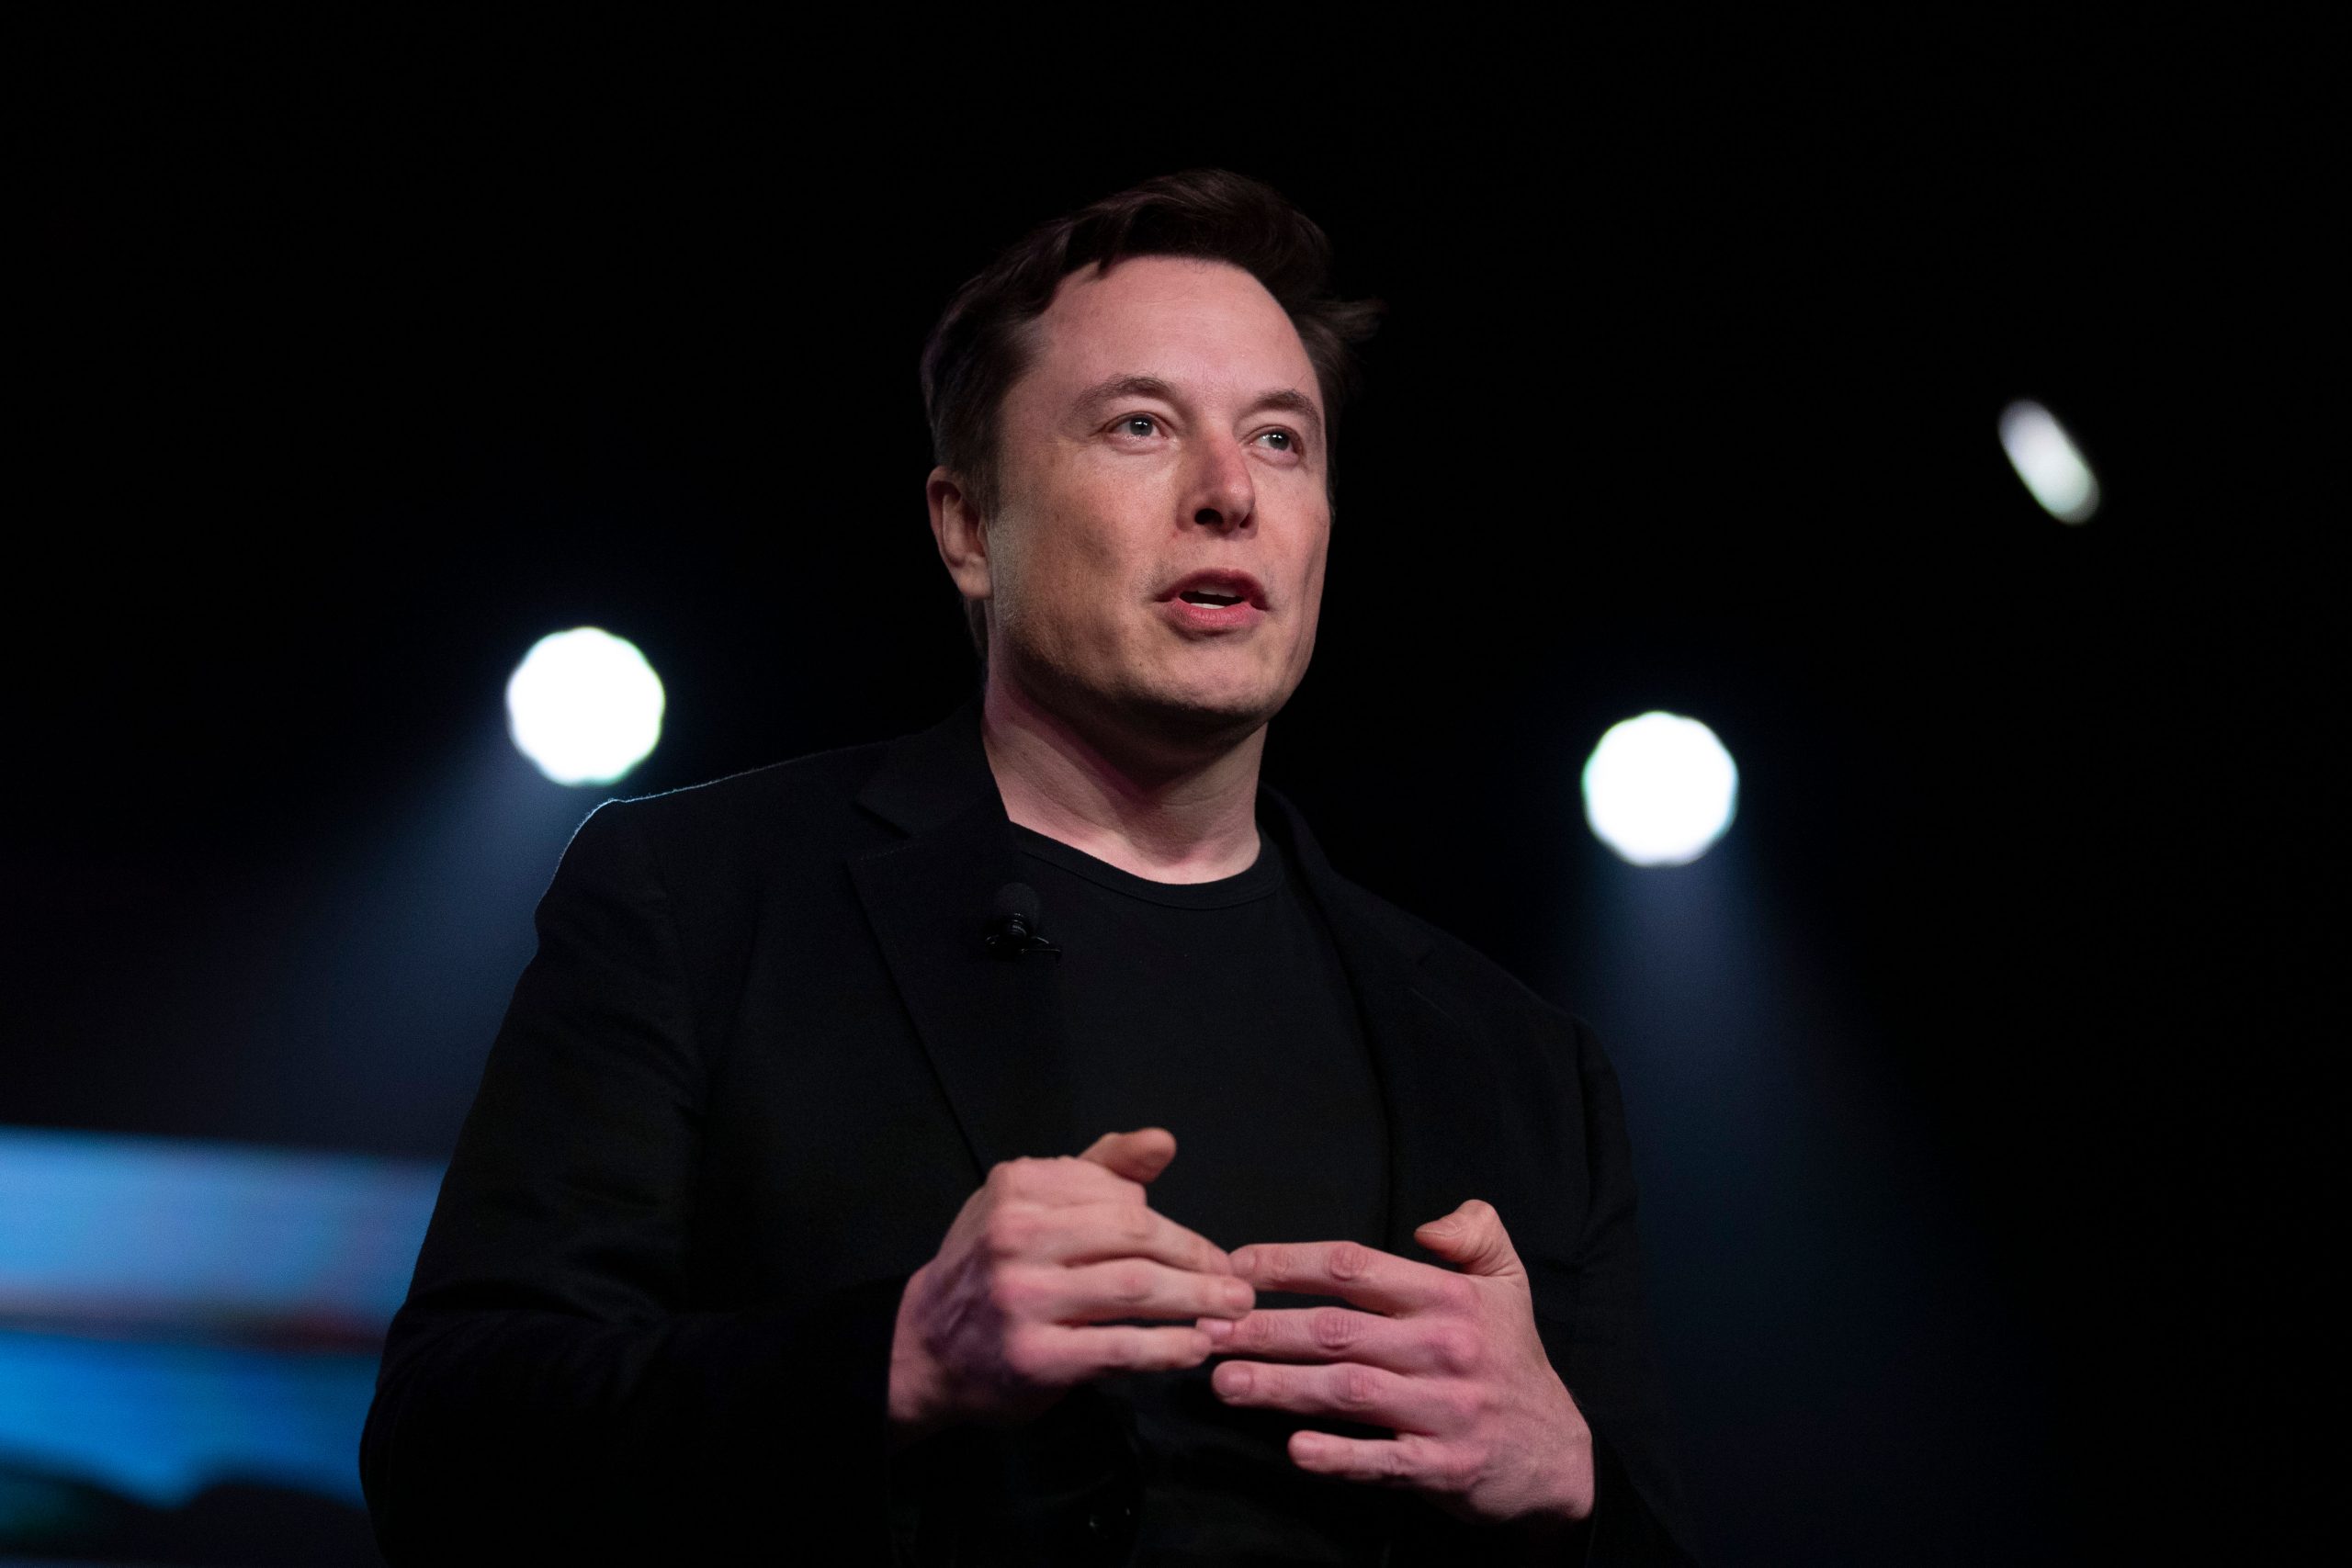 Elon Musk would be angry at staff for not working till 9 pm: Ex-coworker